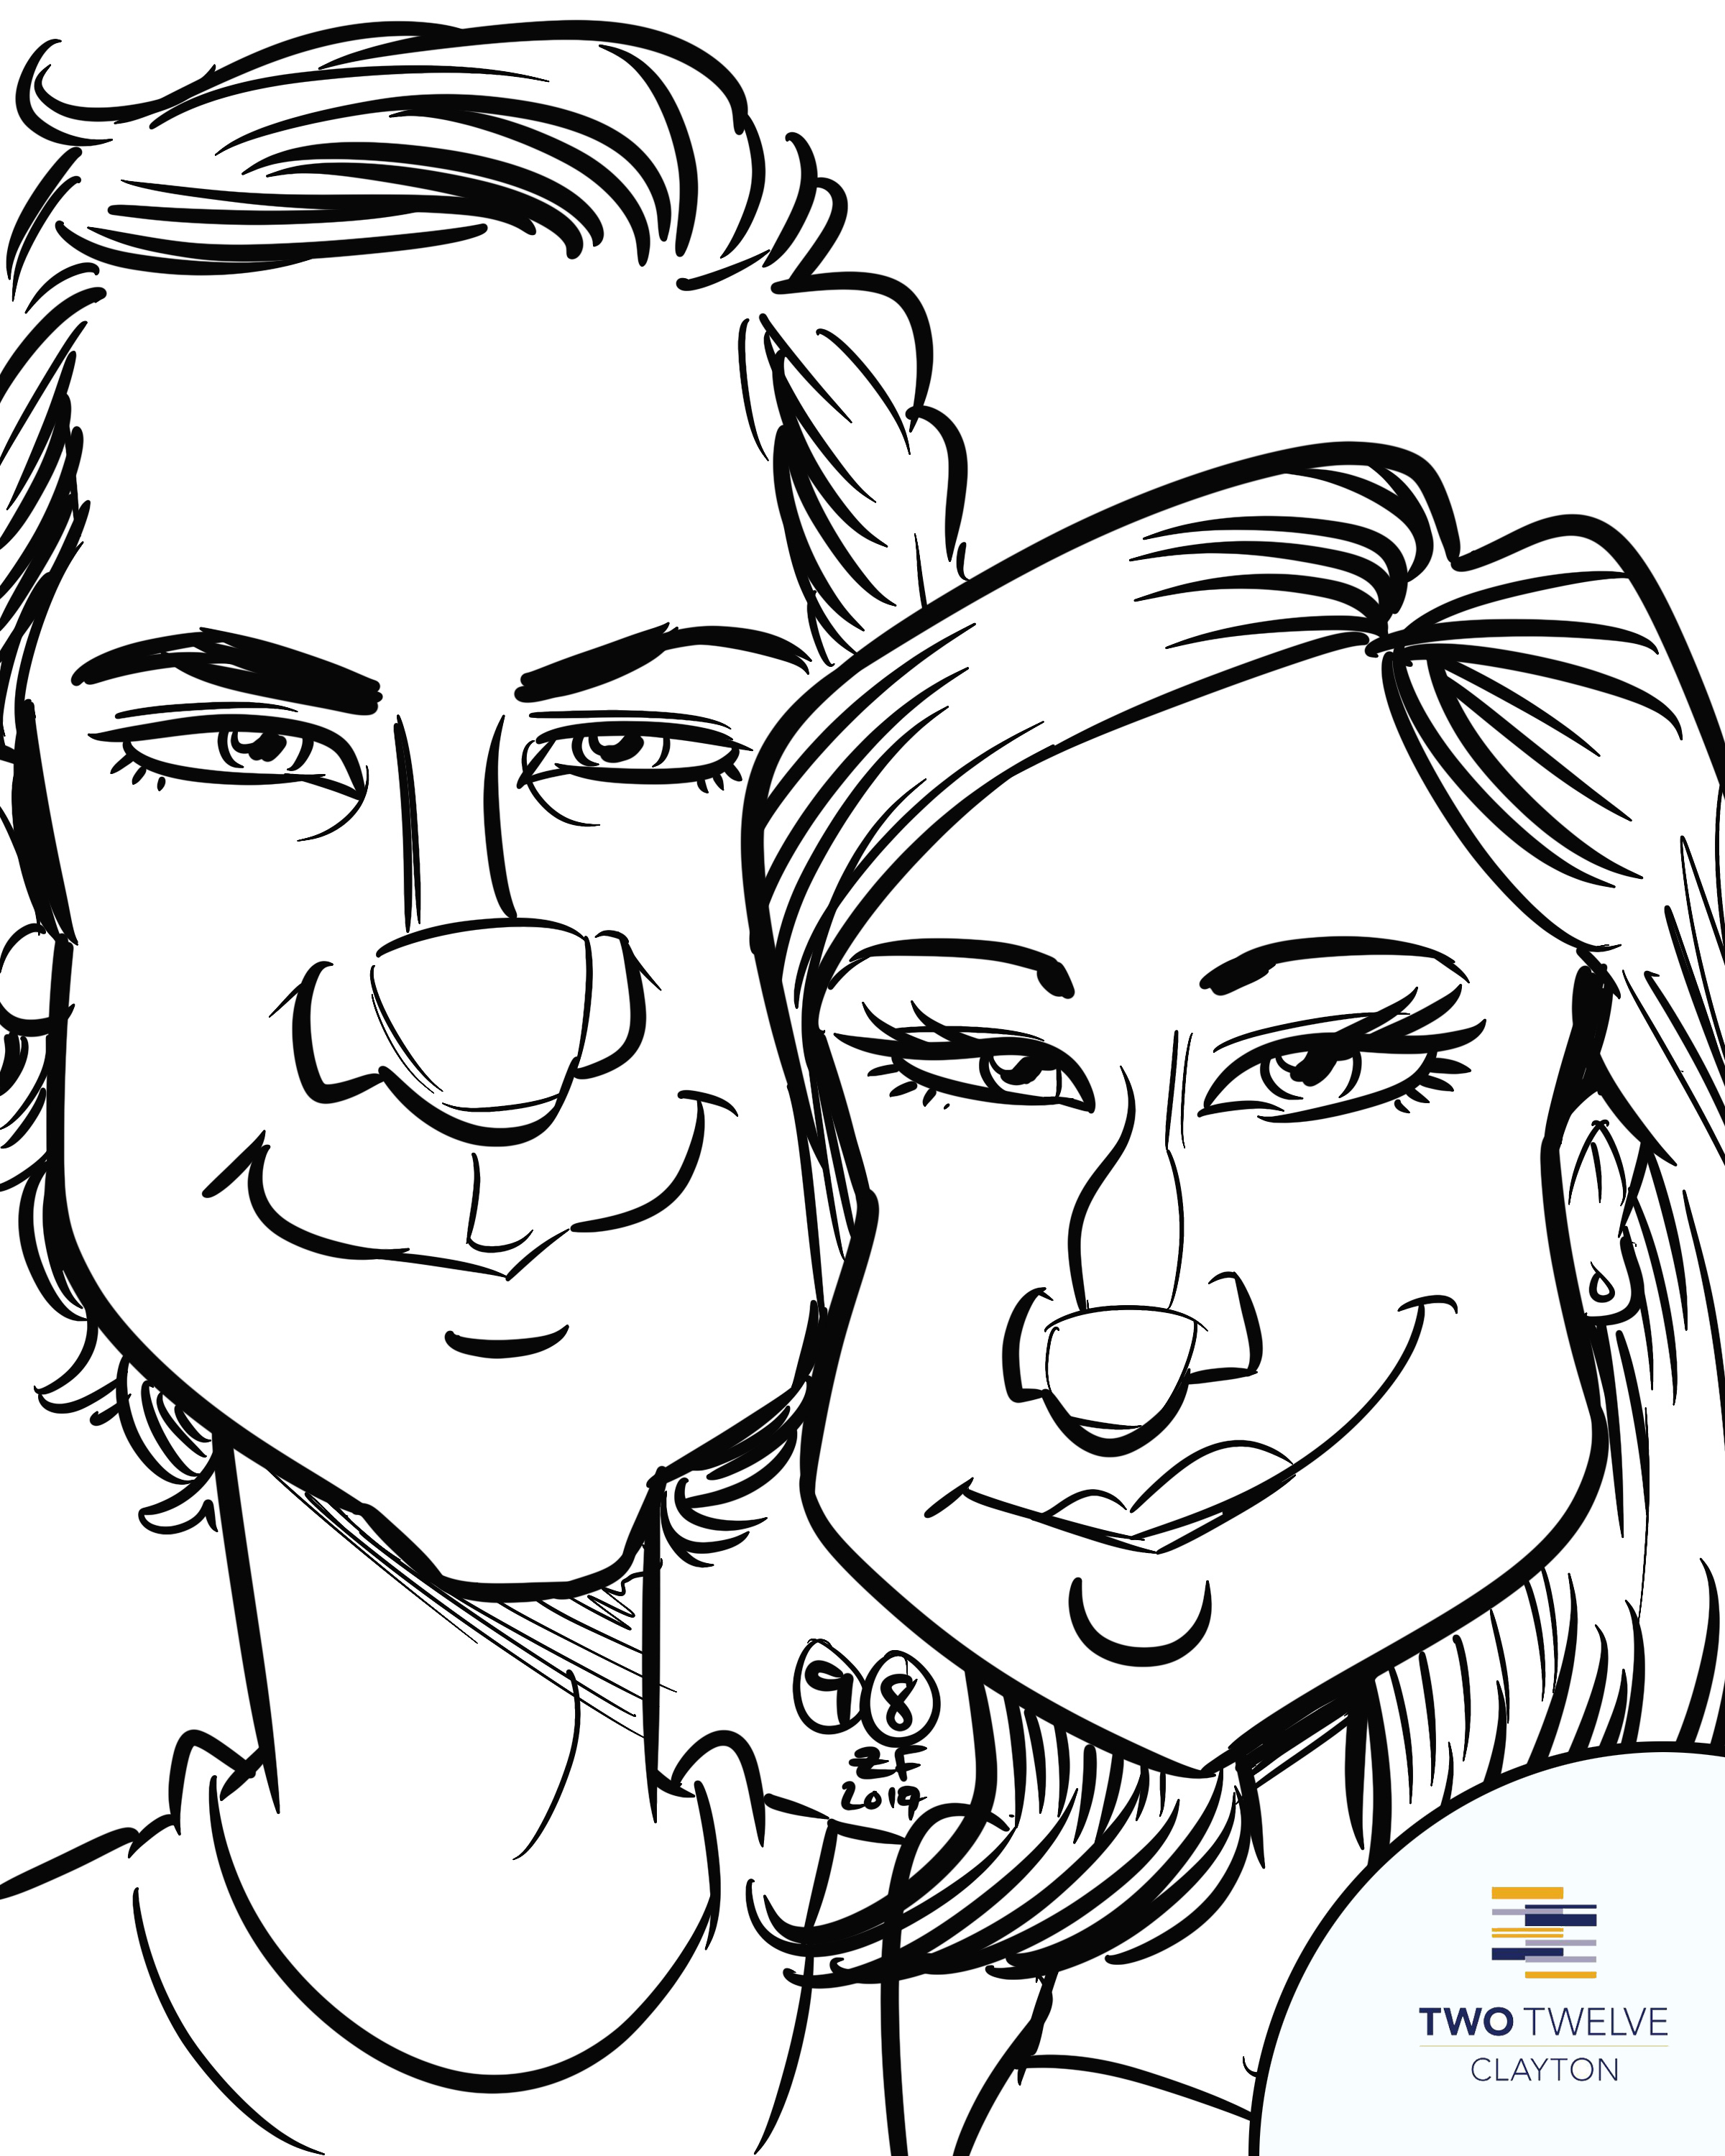 Digital Caricature of couple at Two Twelve Clayton Pool Party, by Bax Illustration